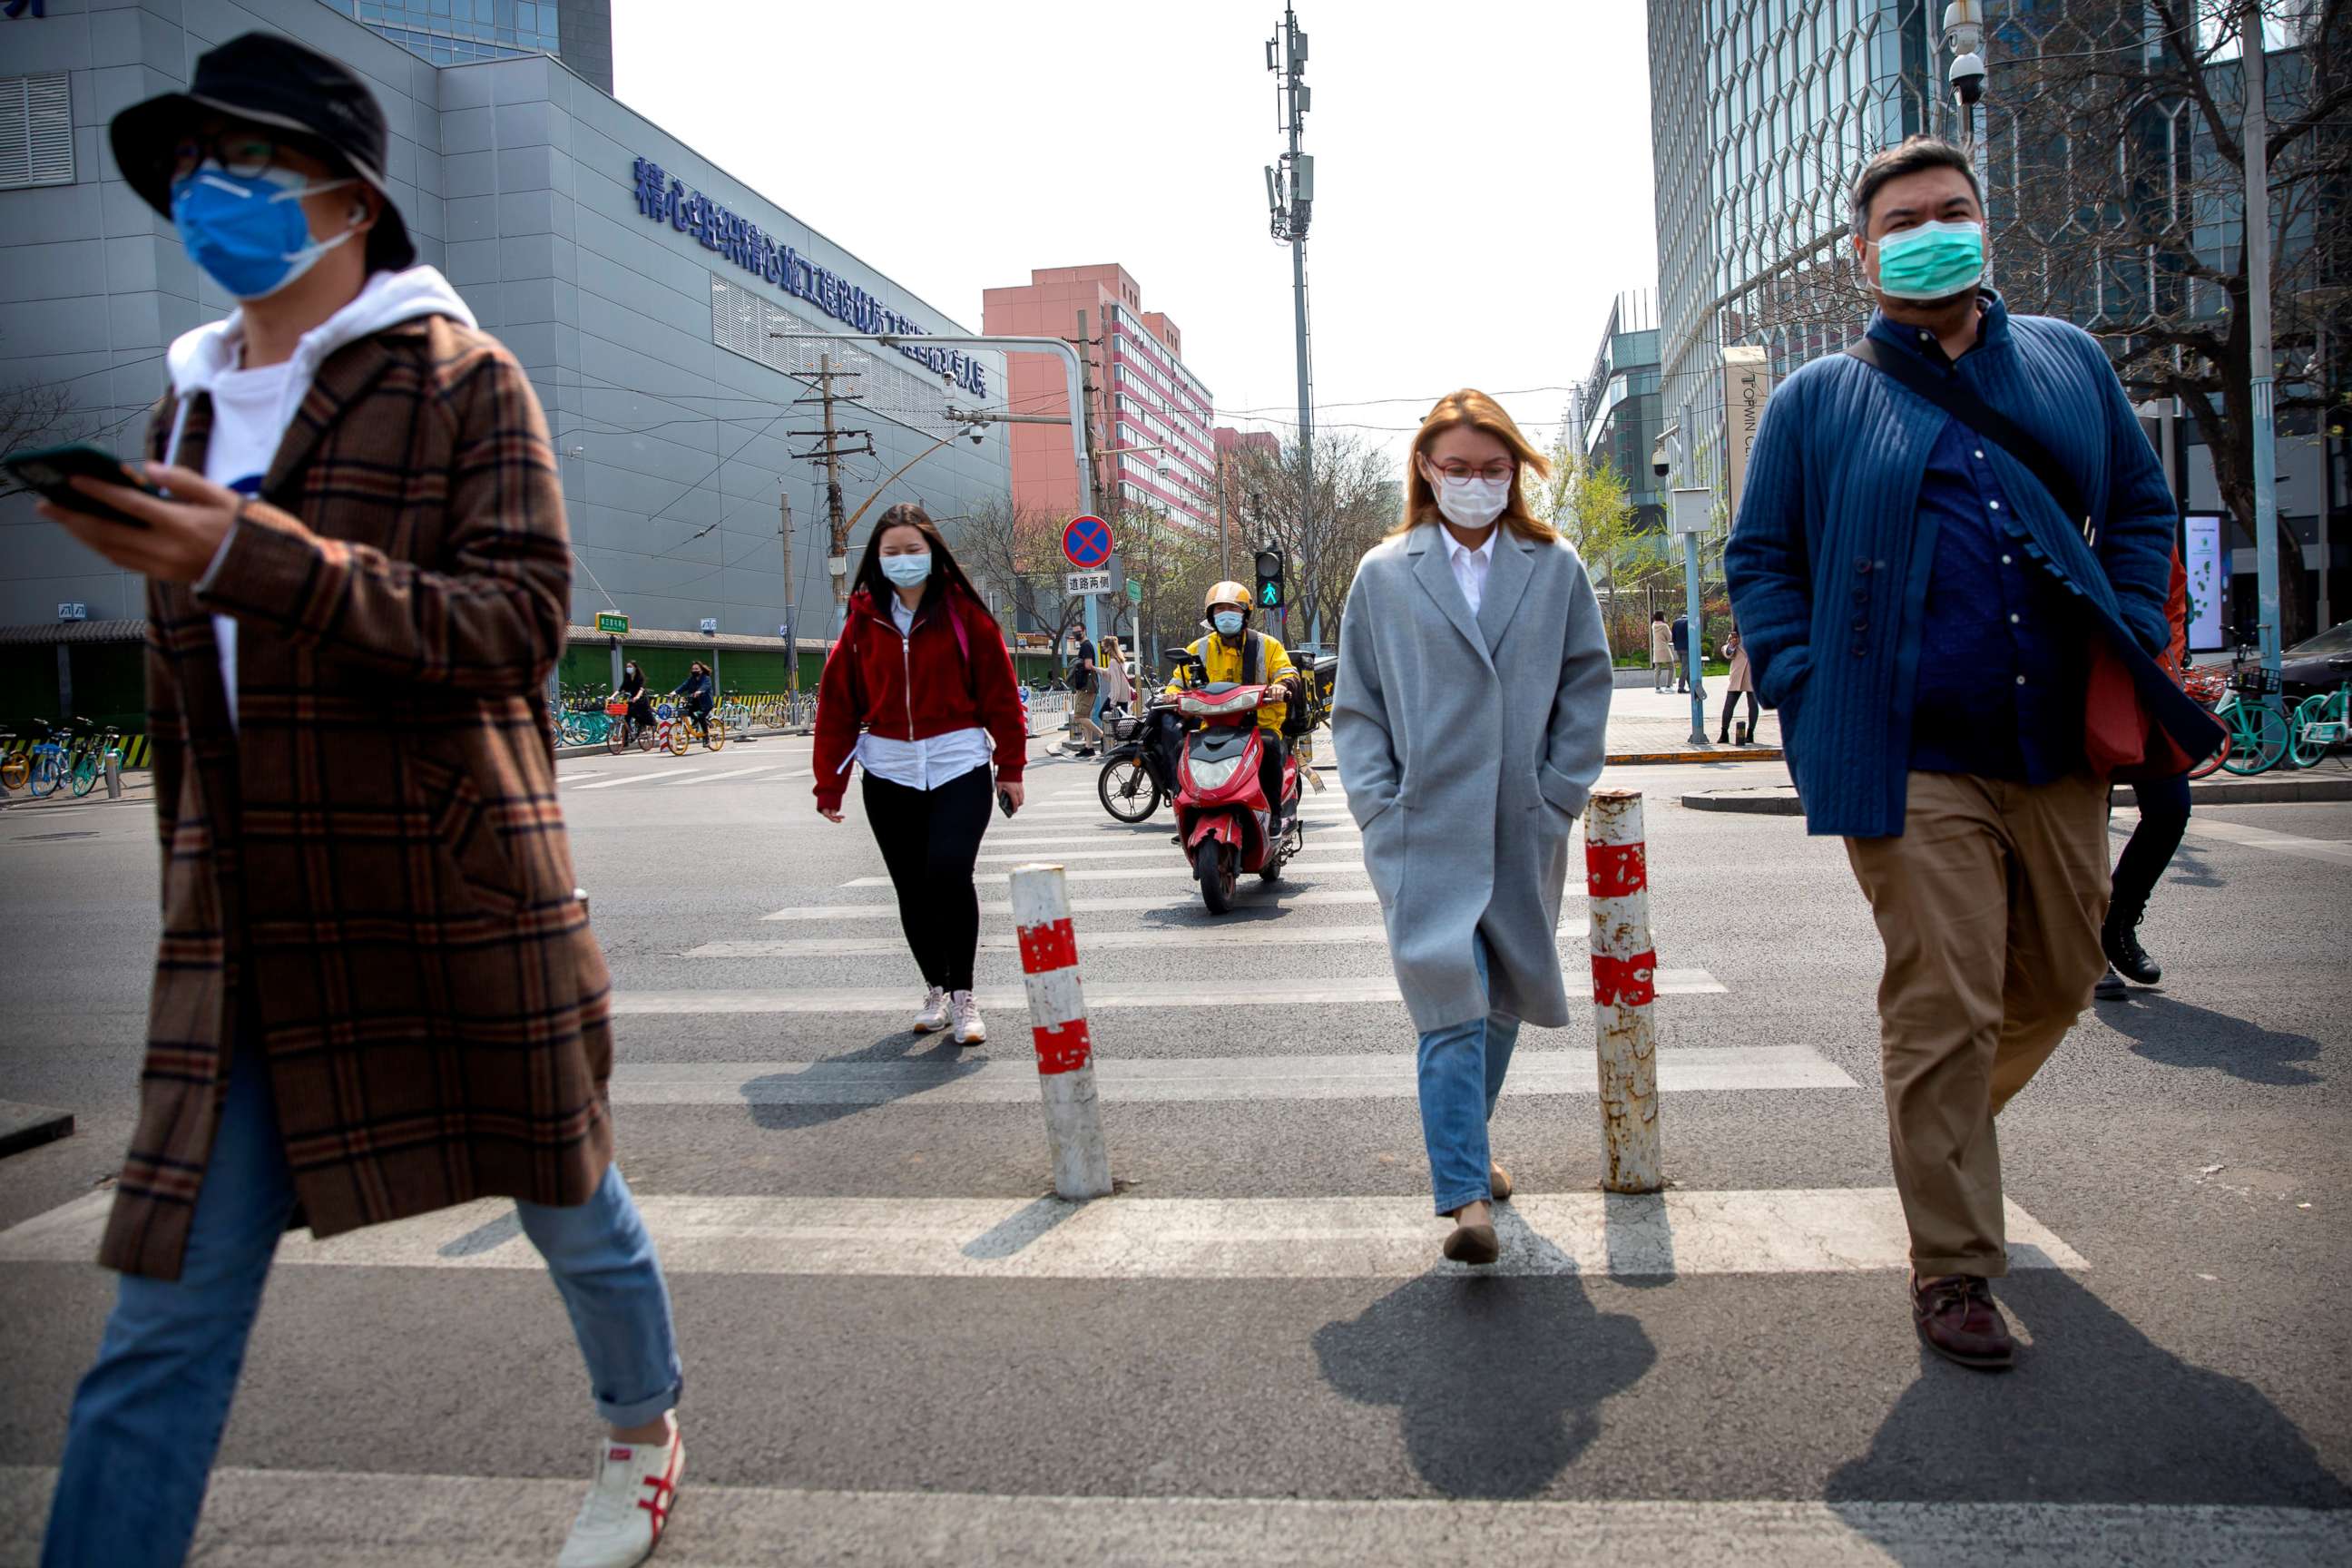 PHOTO: People wear face masks as they walk across an intersection in Beijing, China, on April 7, 2020.